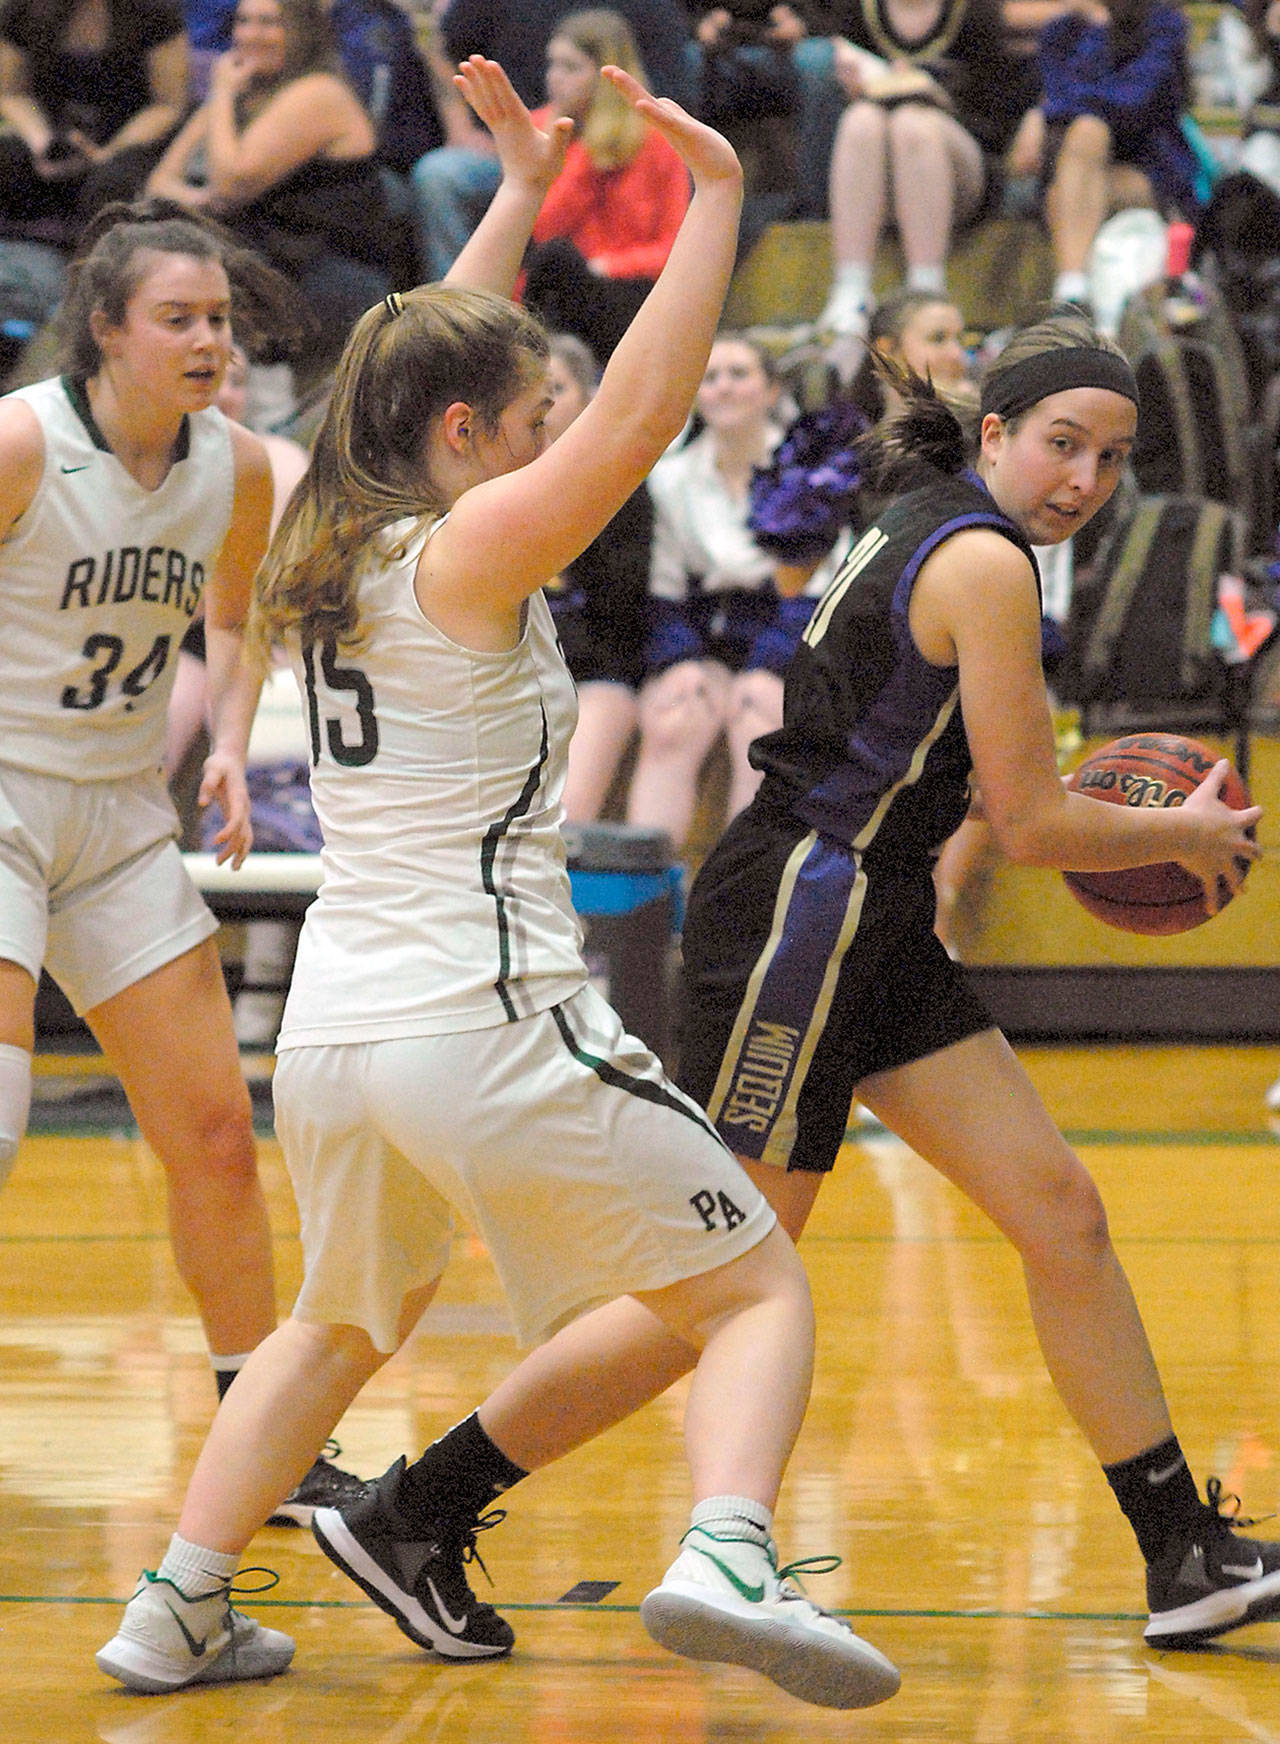 Sequim’s Kalli Wiker, right, gets trapped at the line by Port Angeles’ Myra Walker as Walker’s teammate Jaida Wood, left, looks on during game in Port Angeles. (Keith Thorpe/Peninsula Daily News file)